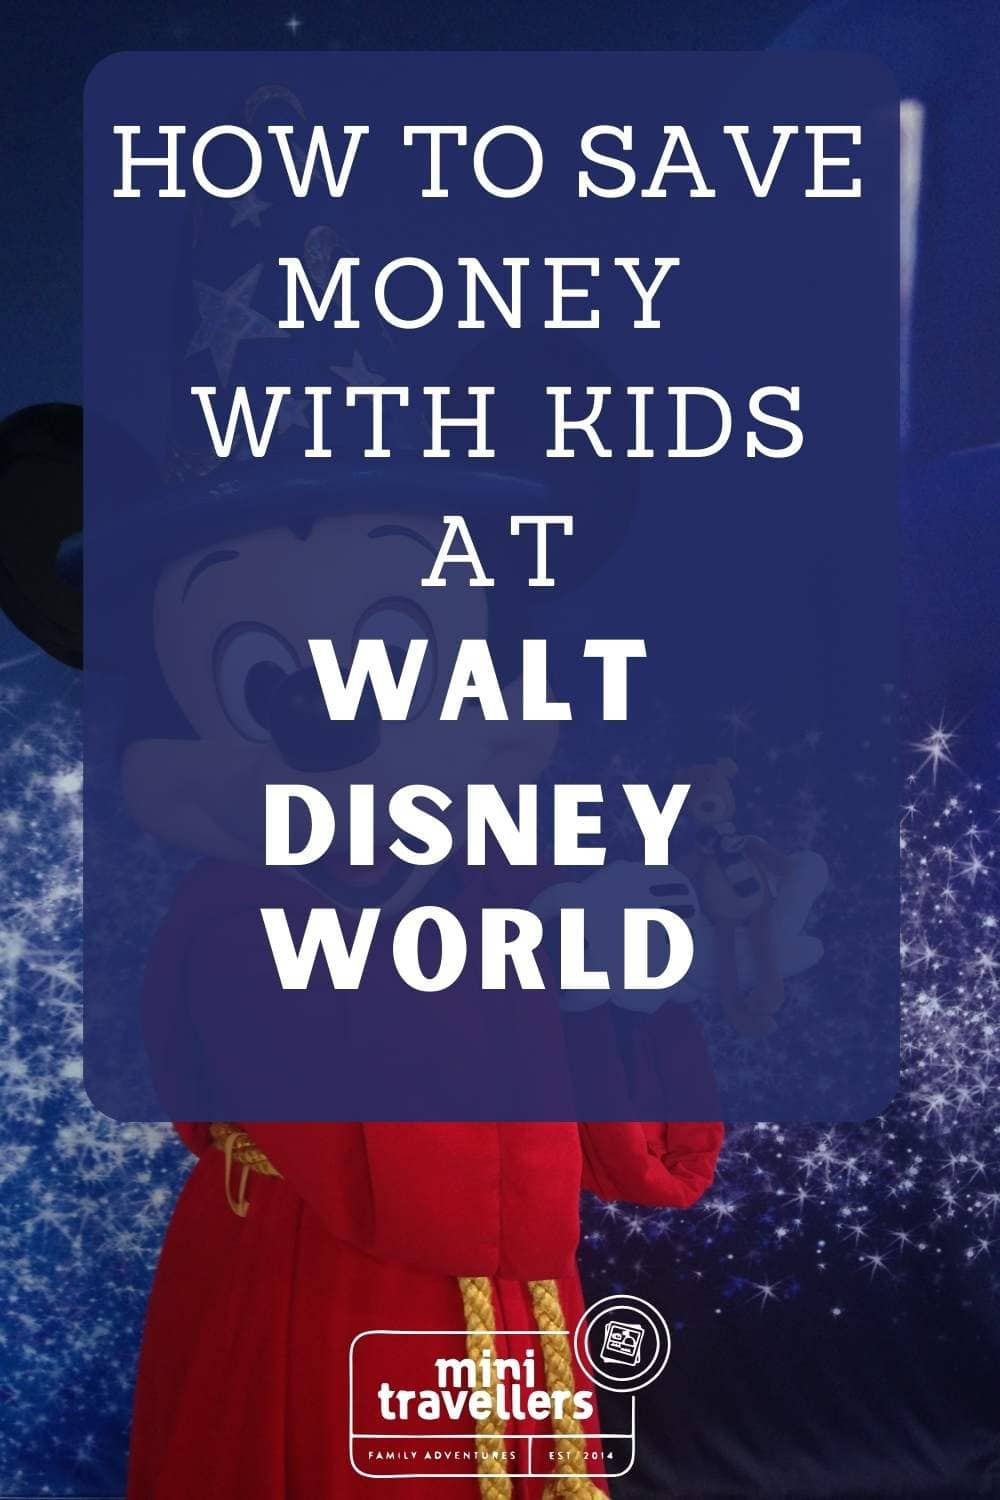 How to save Money with Kids at Walt Disney World